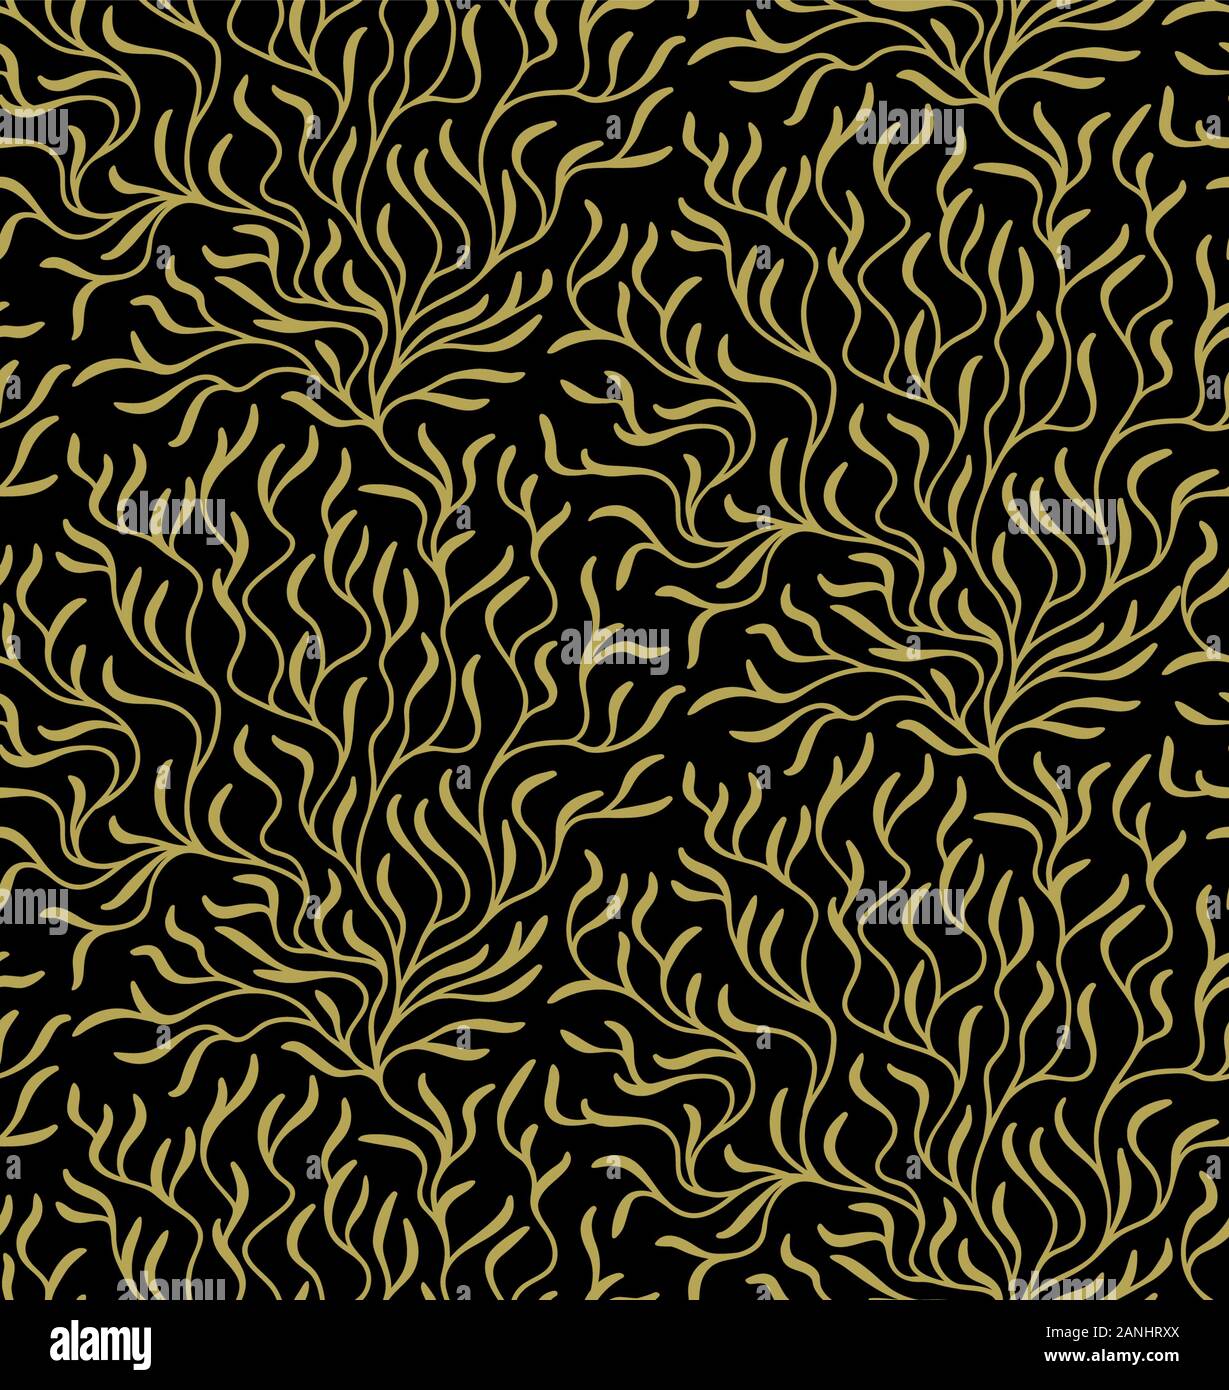 Abstract seamless vector pattern. Leaves, branches, bushes.  Golden, isolated black background. Stock Photo